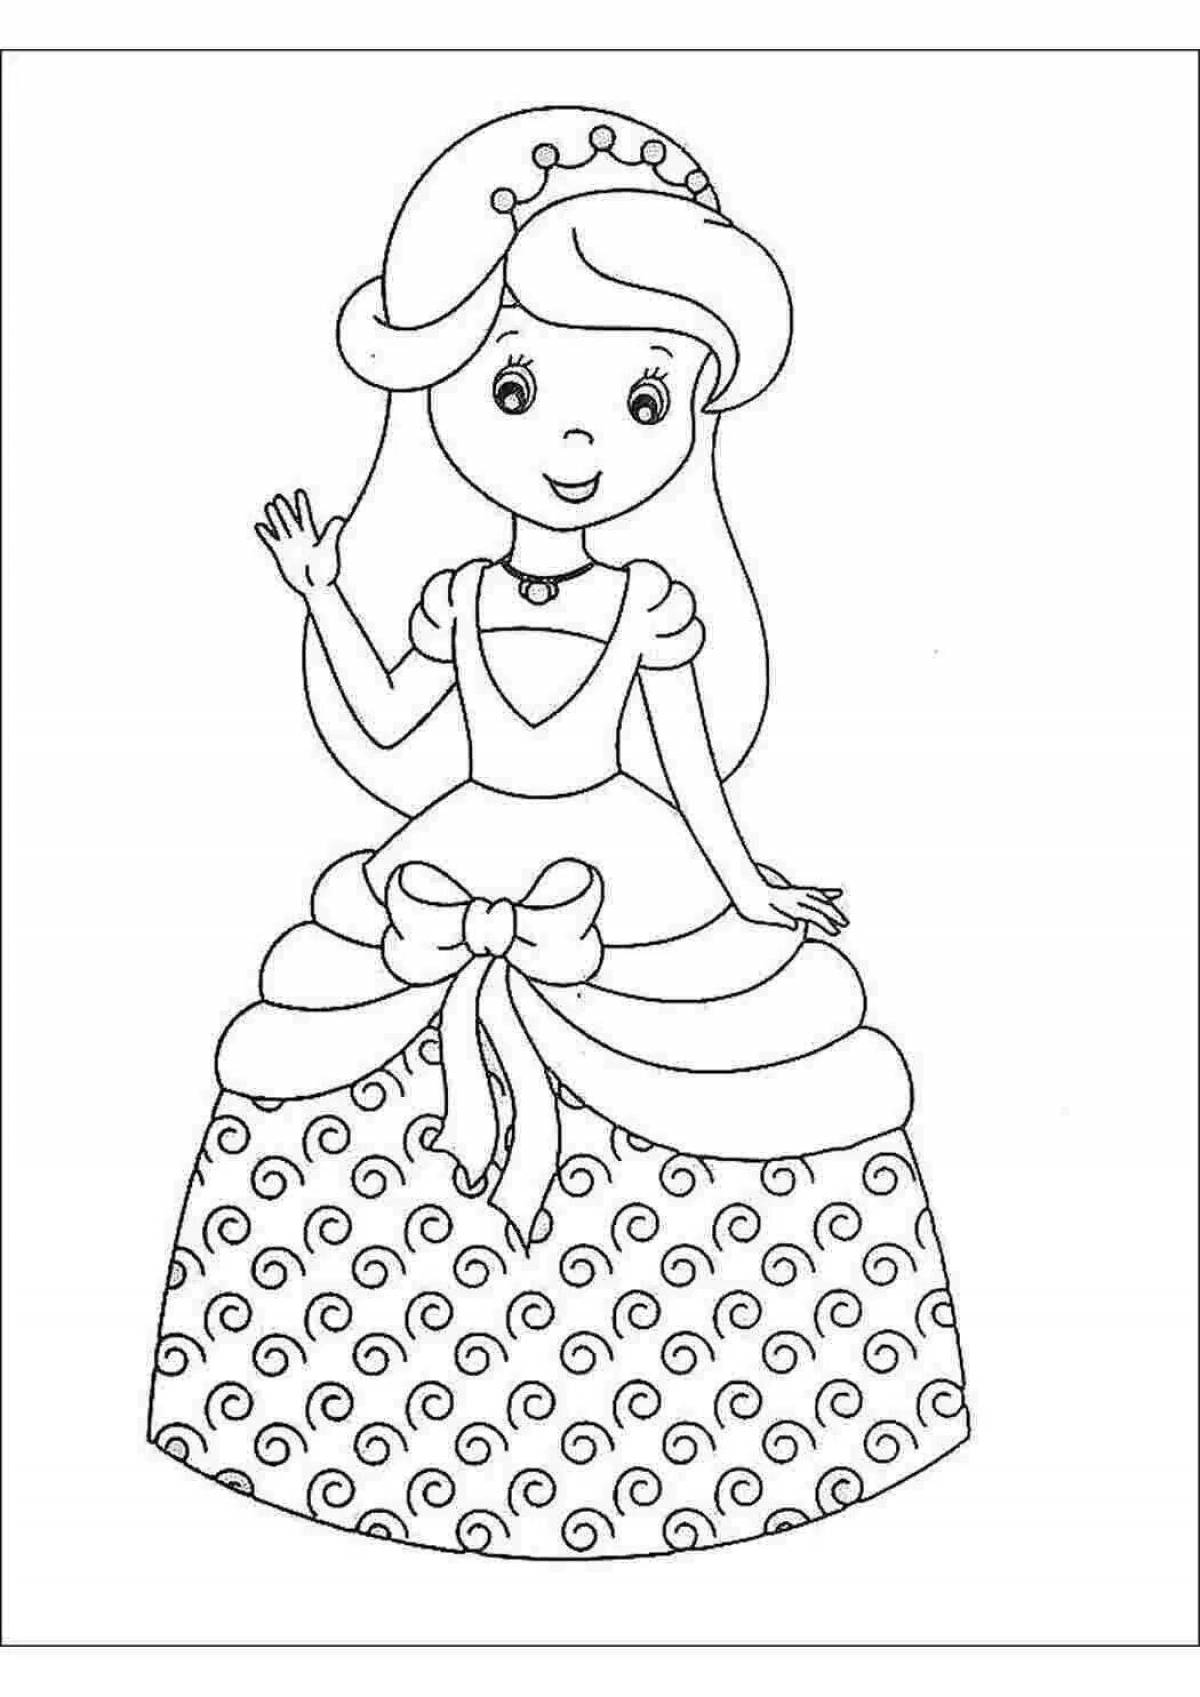 Fun coloring doll for 5-6 year olds